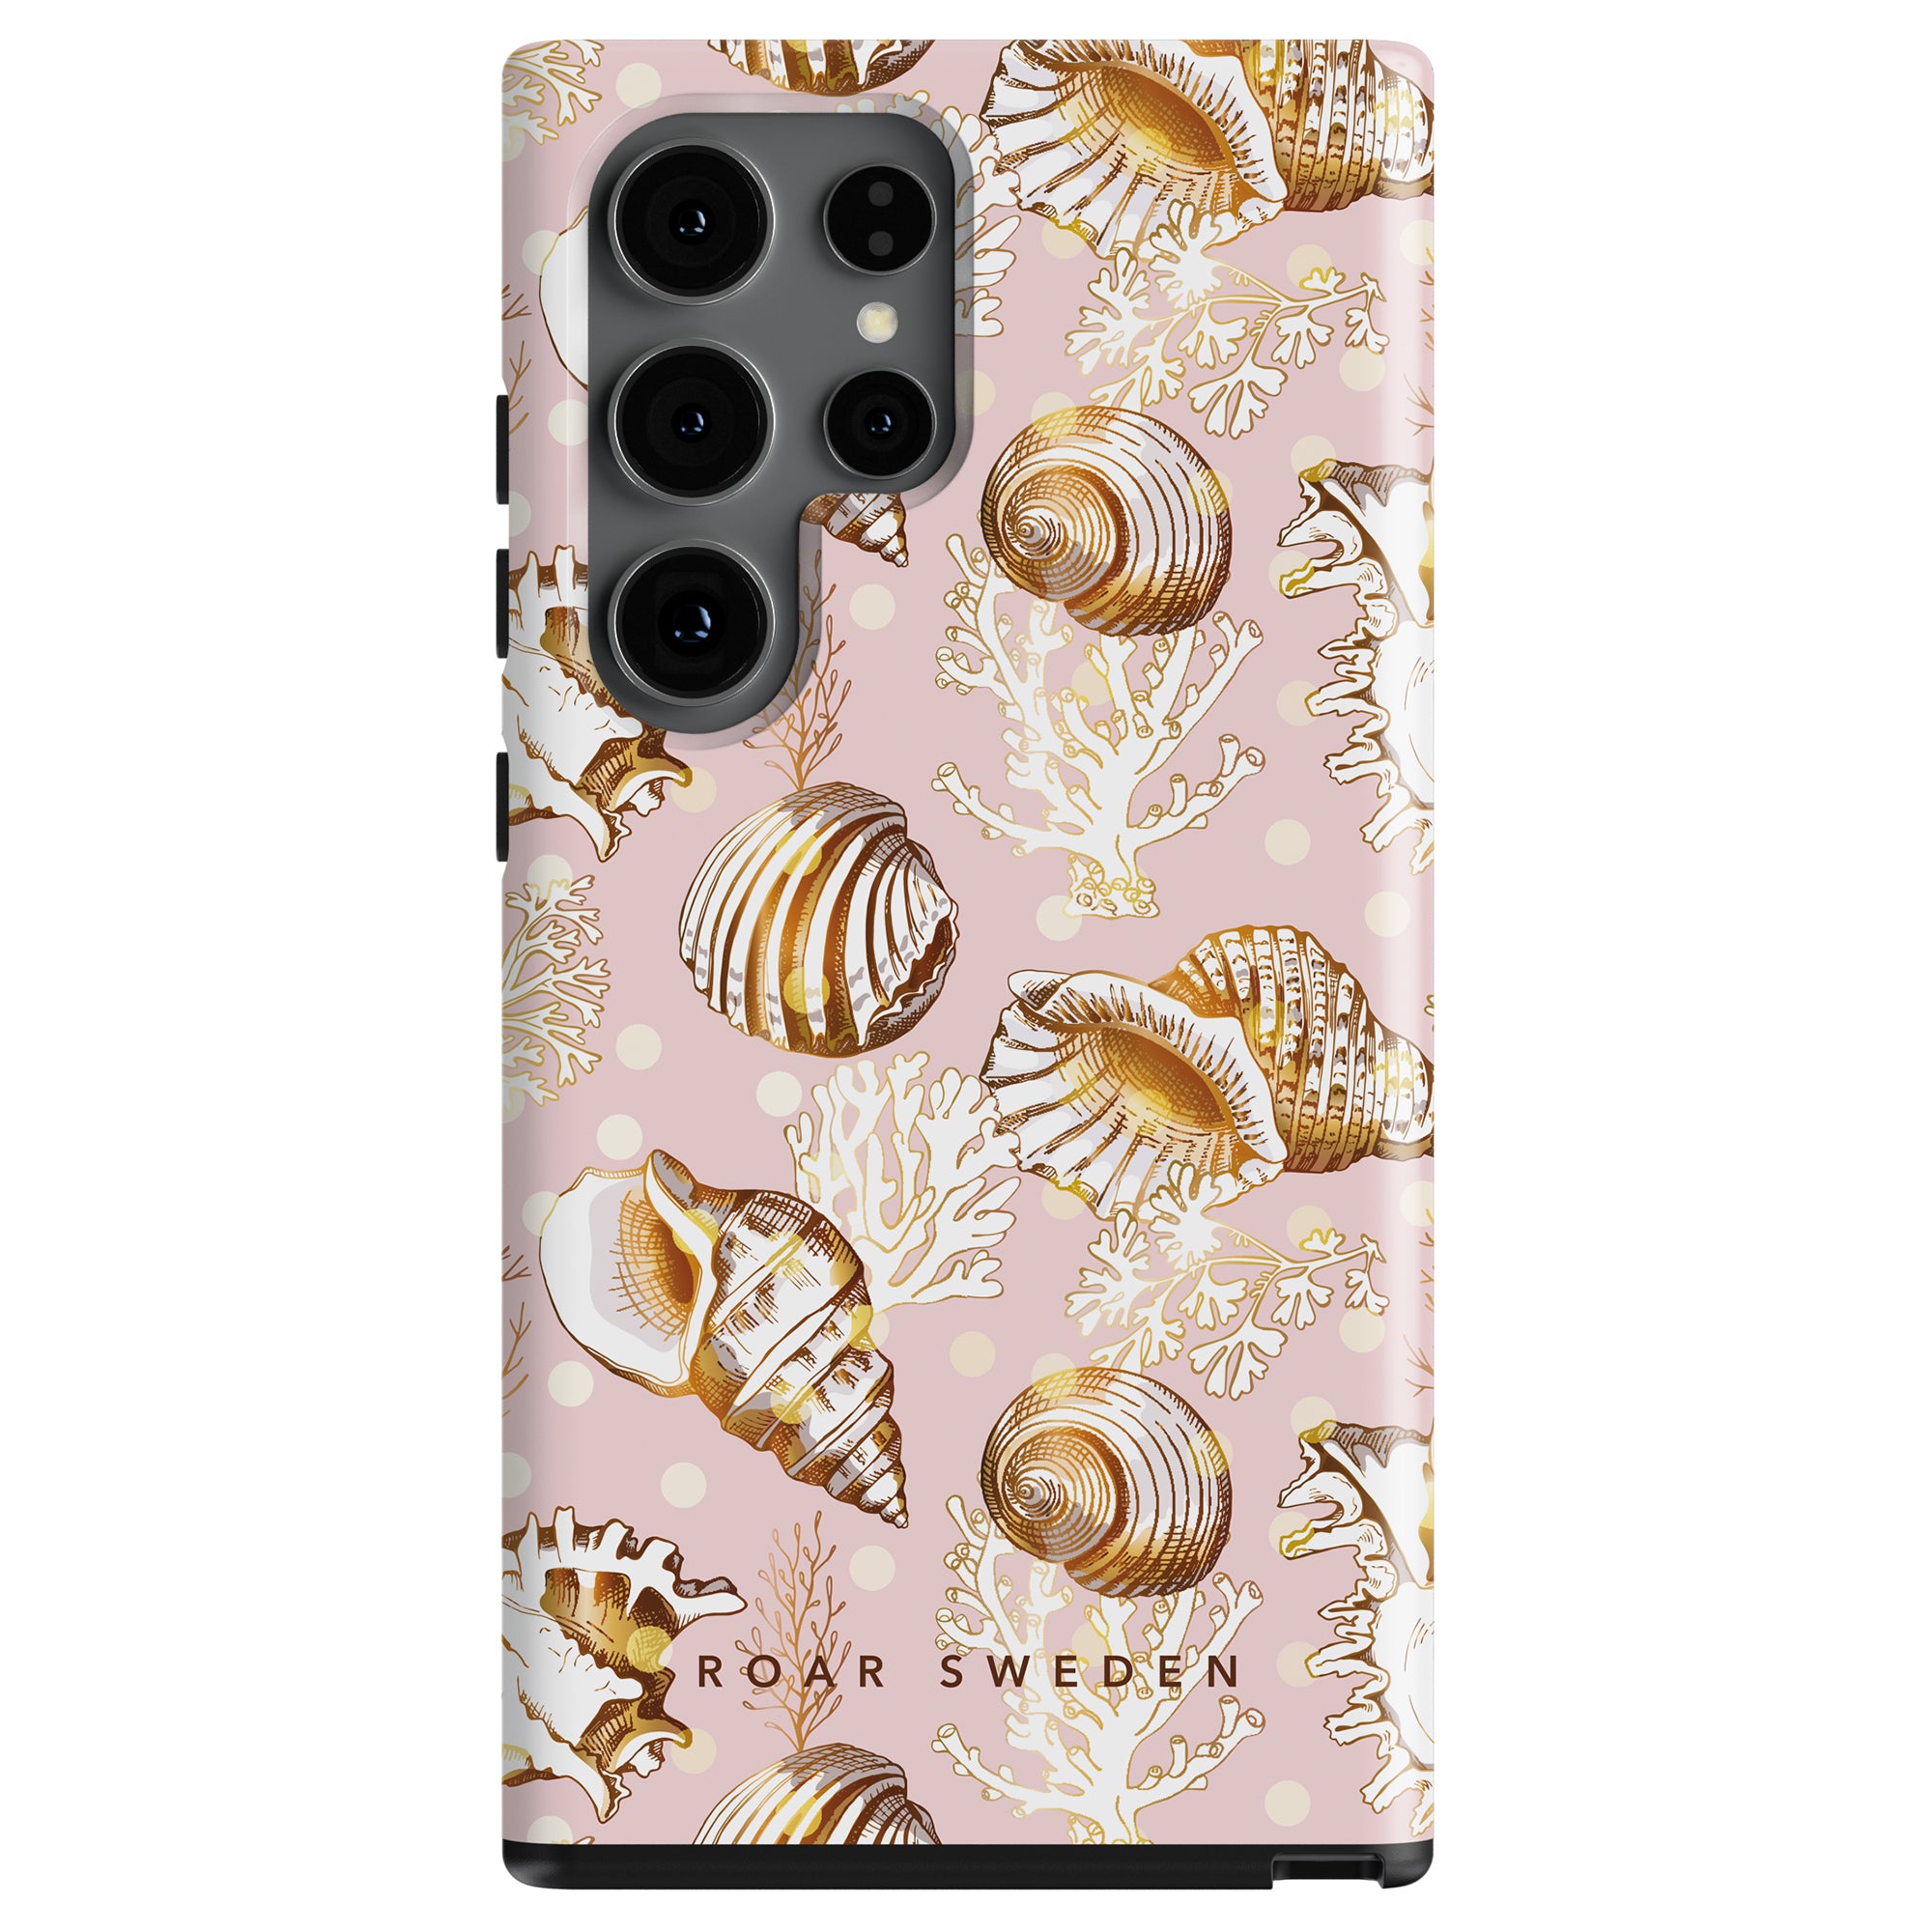 A Bivalvia - Tough Case from the ocean collection features a seashell pattern design on a pink background.